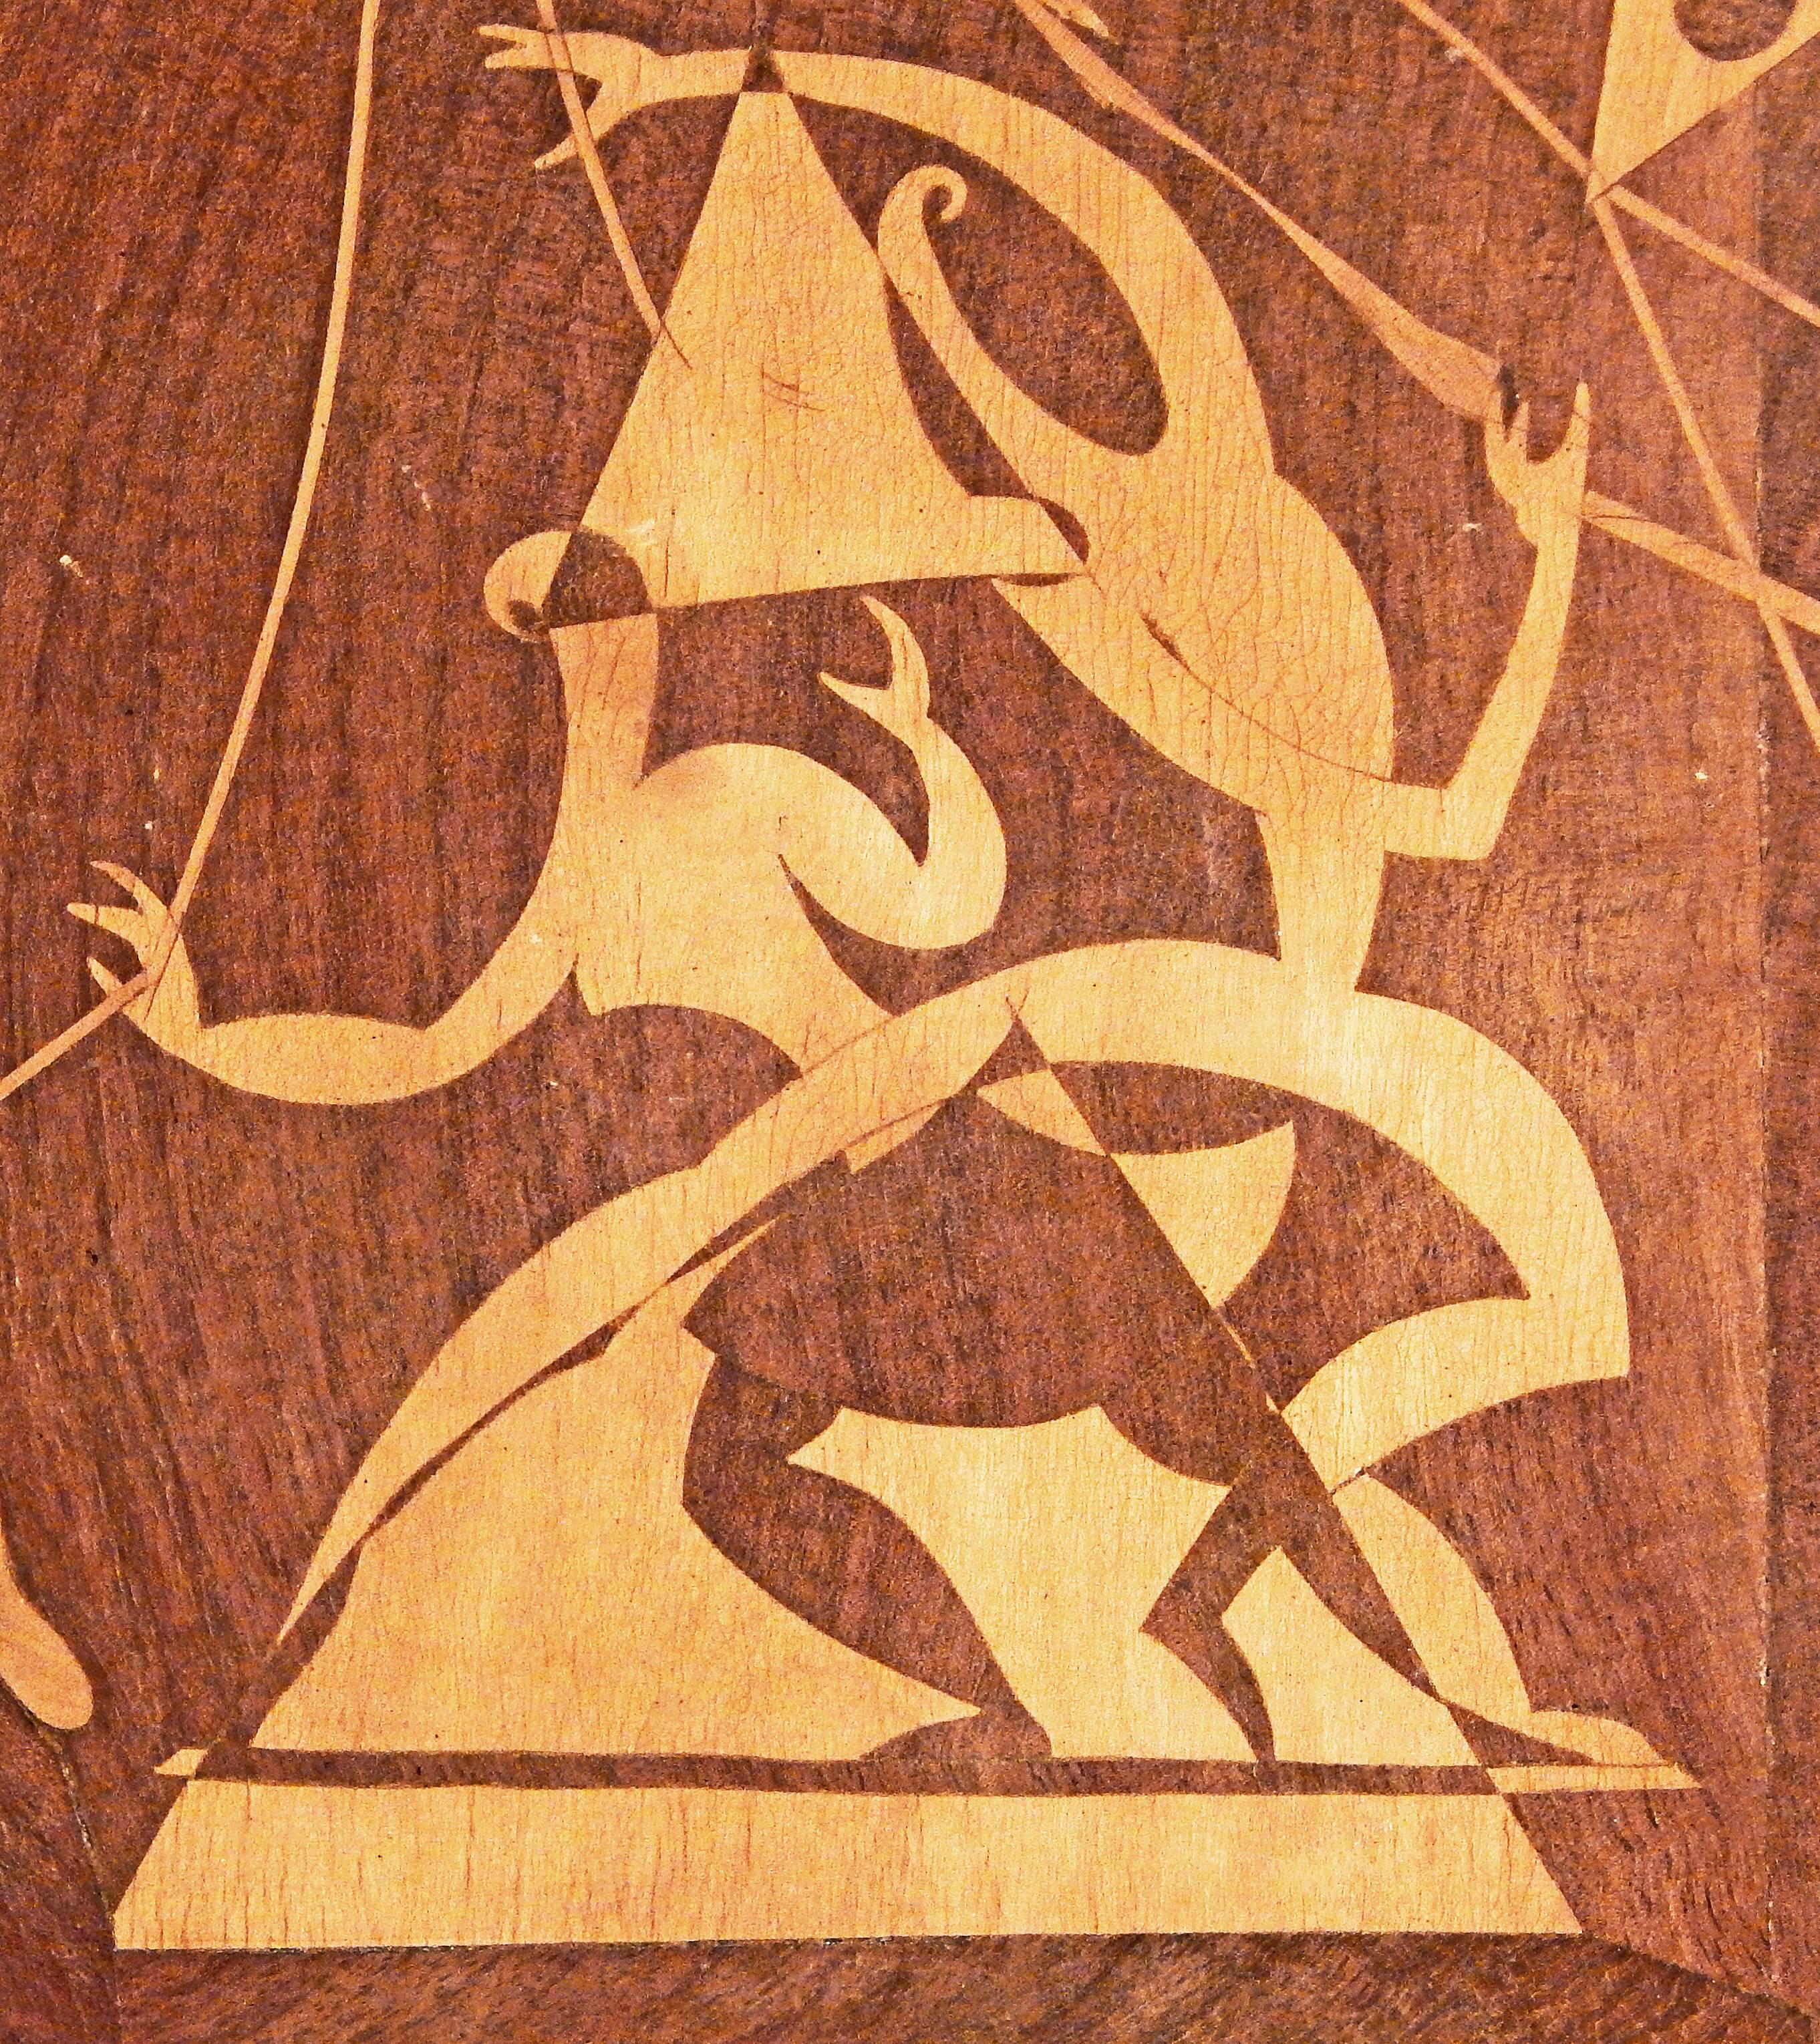 Brilliantly designed and executed, this example of wood inlay Folk Art, by Renato Maggiora in 1953, depicts a pair of circus acrobats at the centre, highly stylized and showing the influence of Cubism, Surrealism and midcentury abstraction. To the